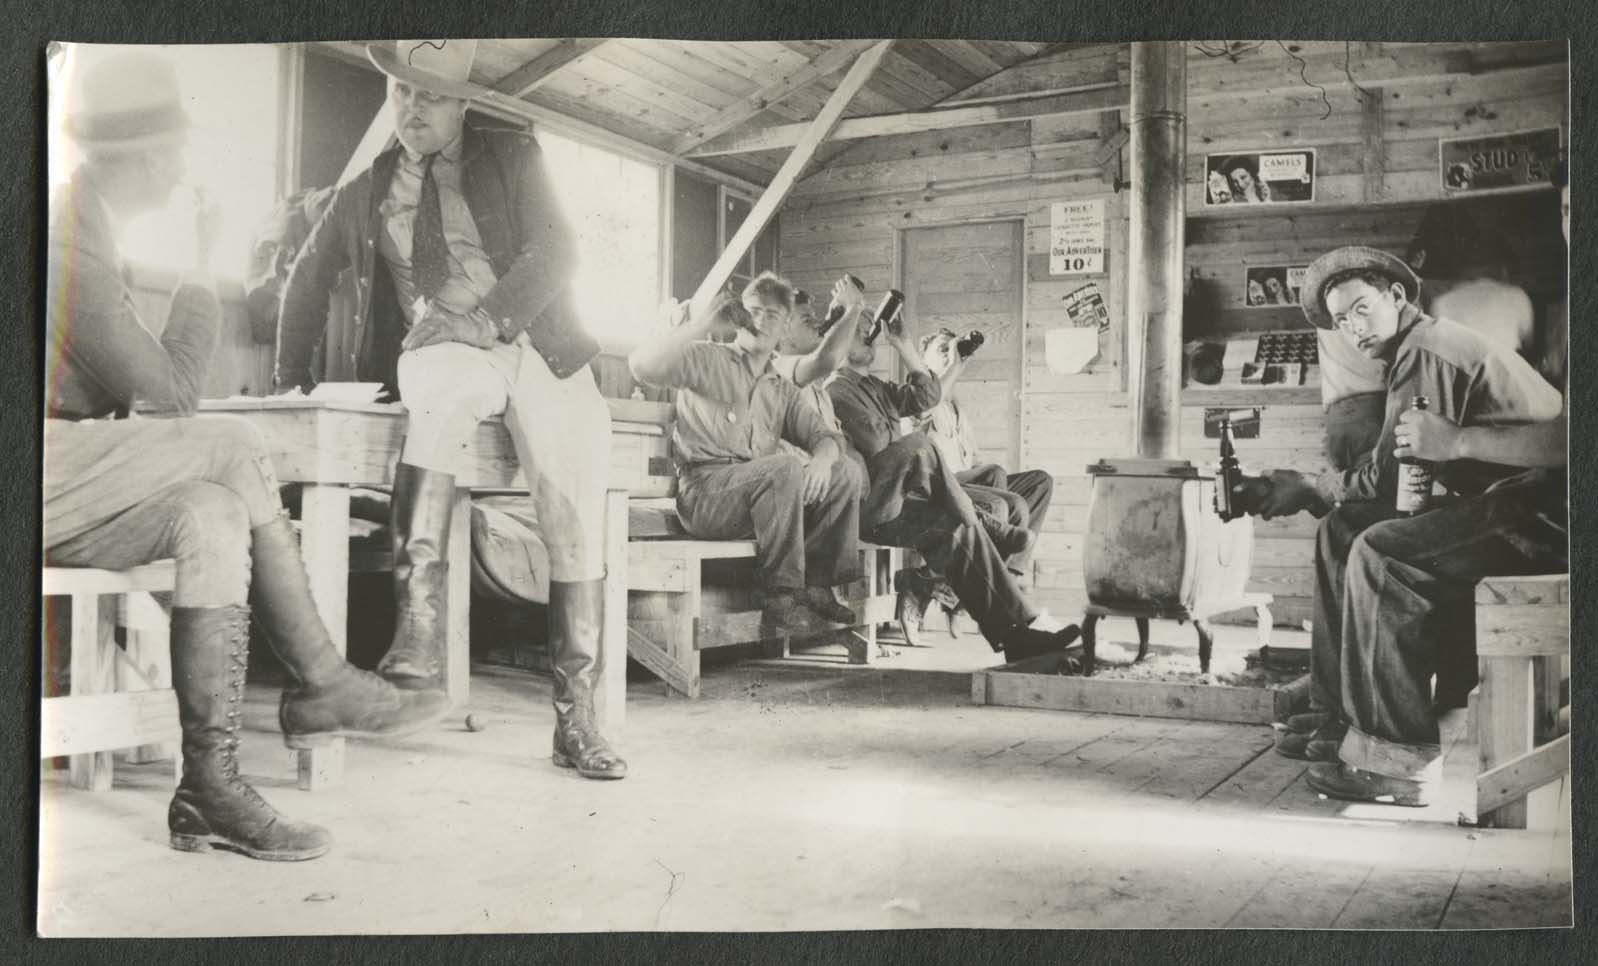 Men in building with stove drinking something from a bottle and talking with two men with hats and high boots, site unknown